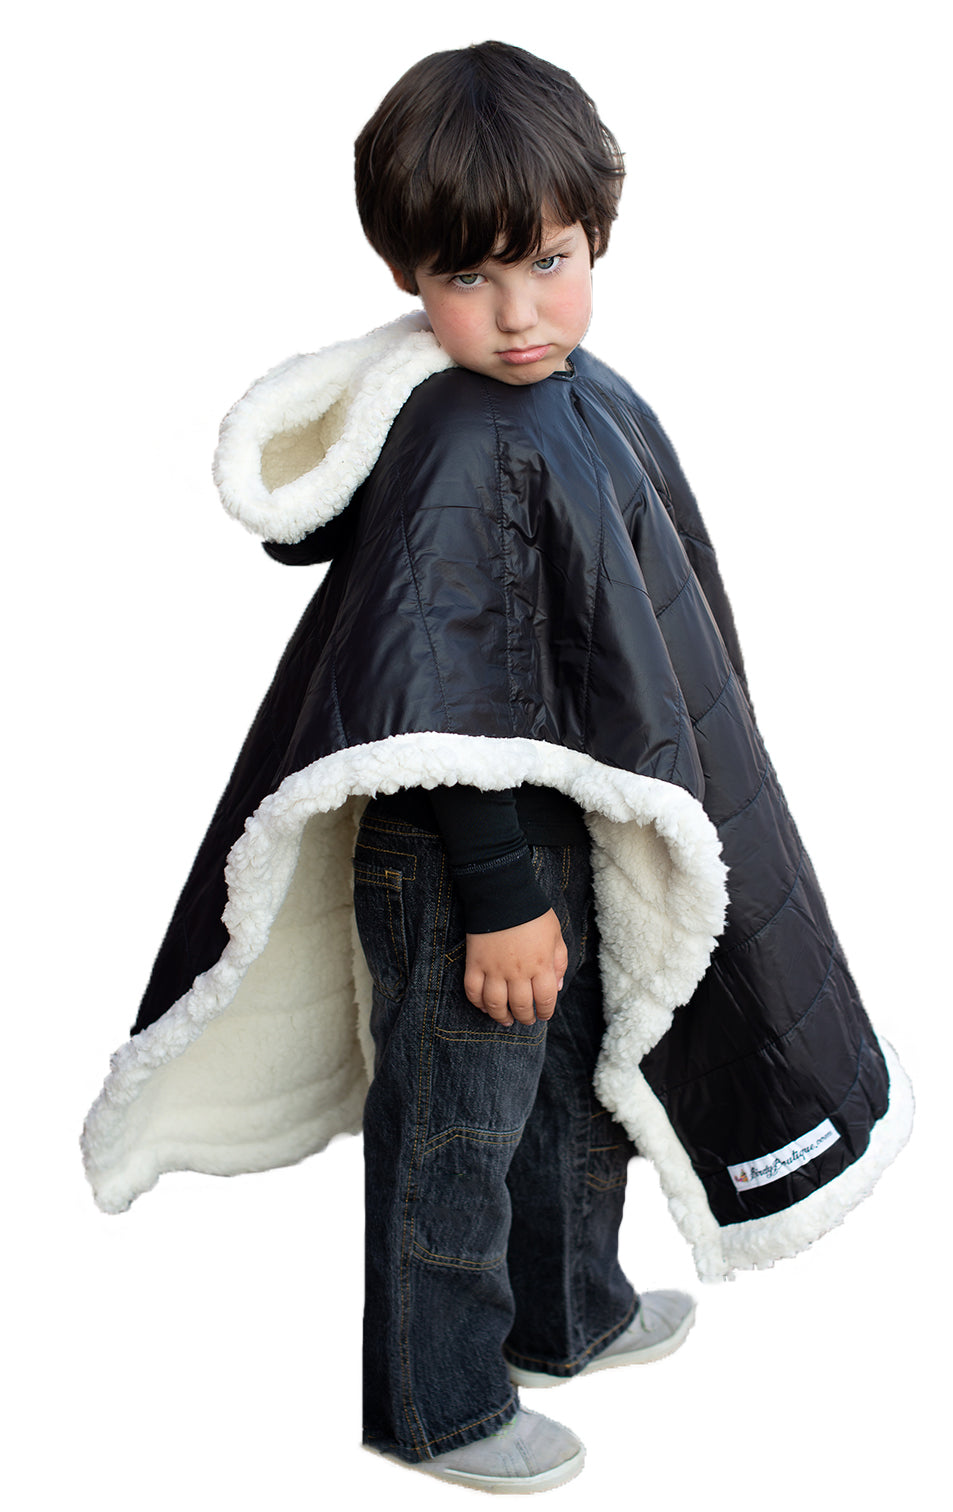 Carseat Poncho: Keeping Kids Warm and Safe During Winter